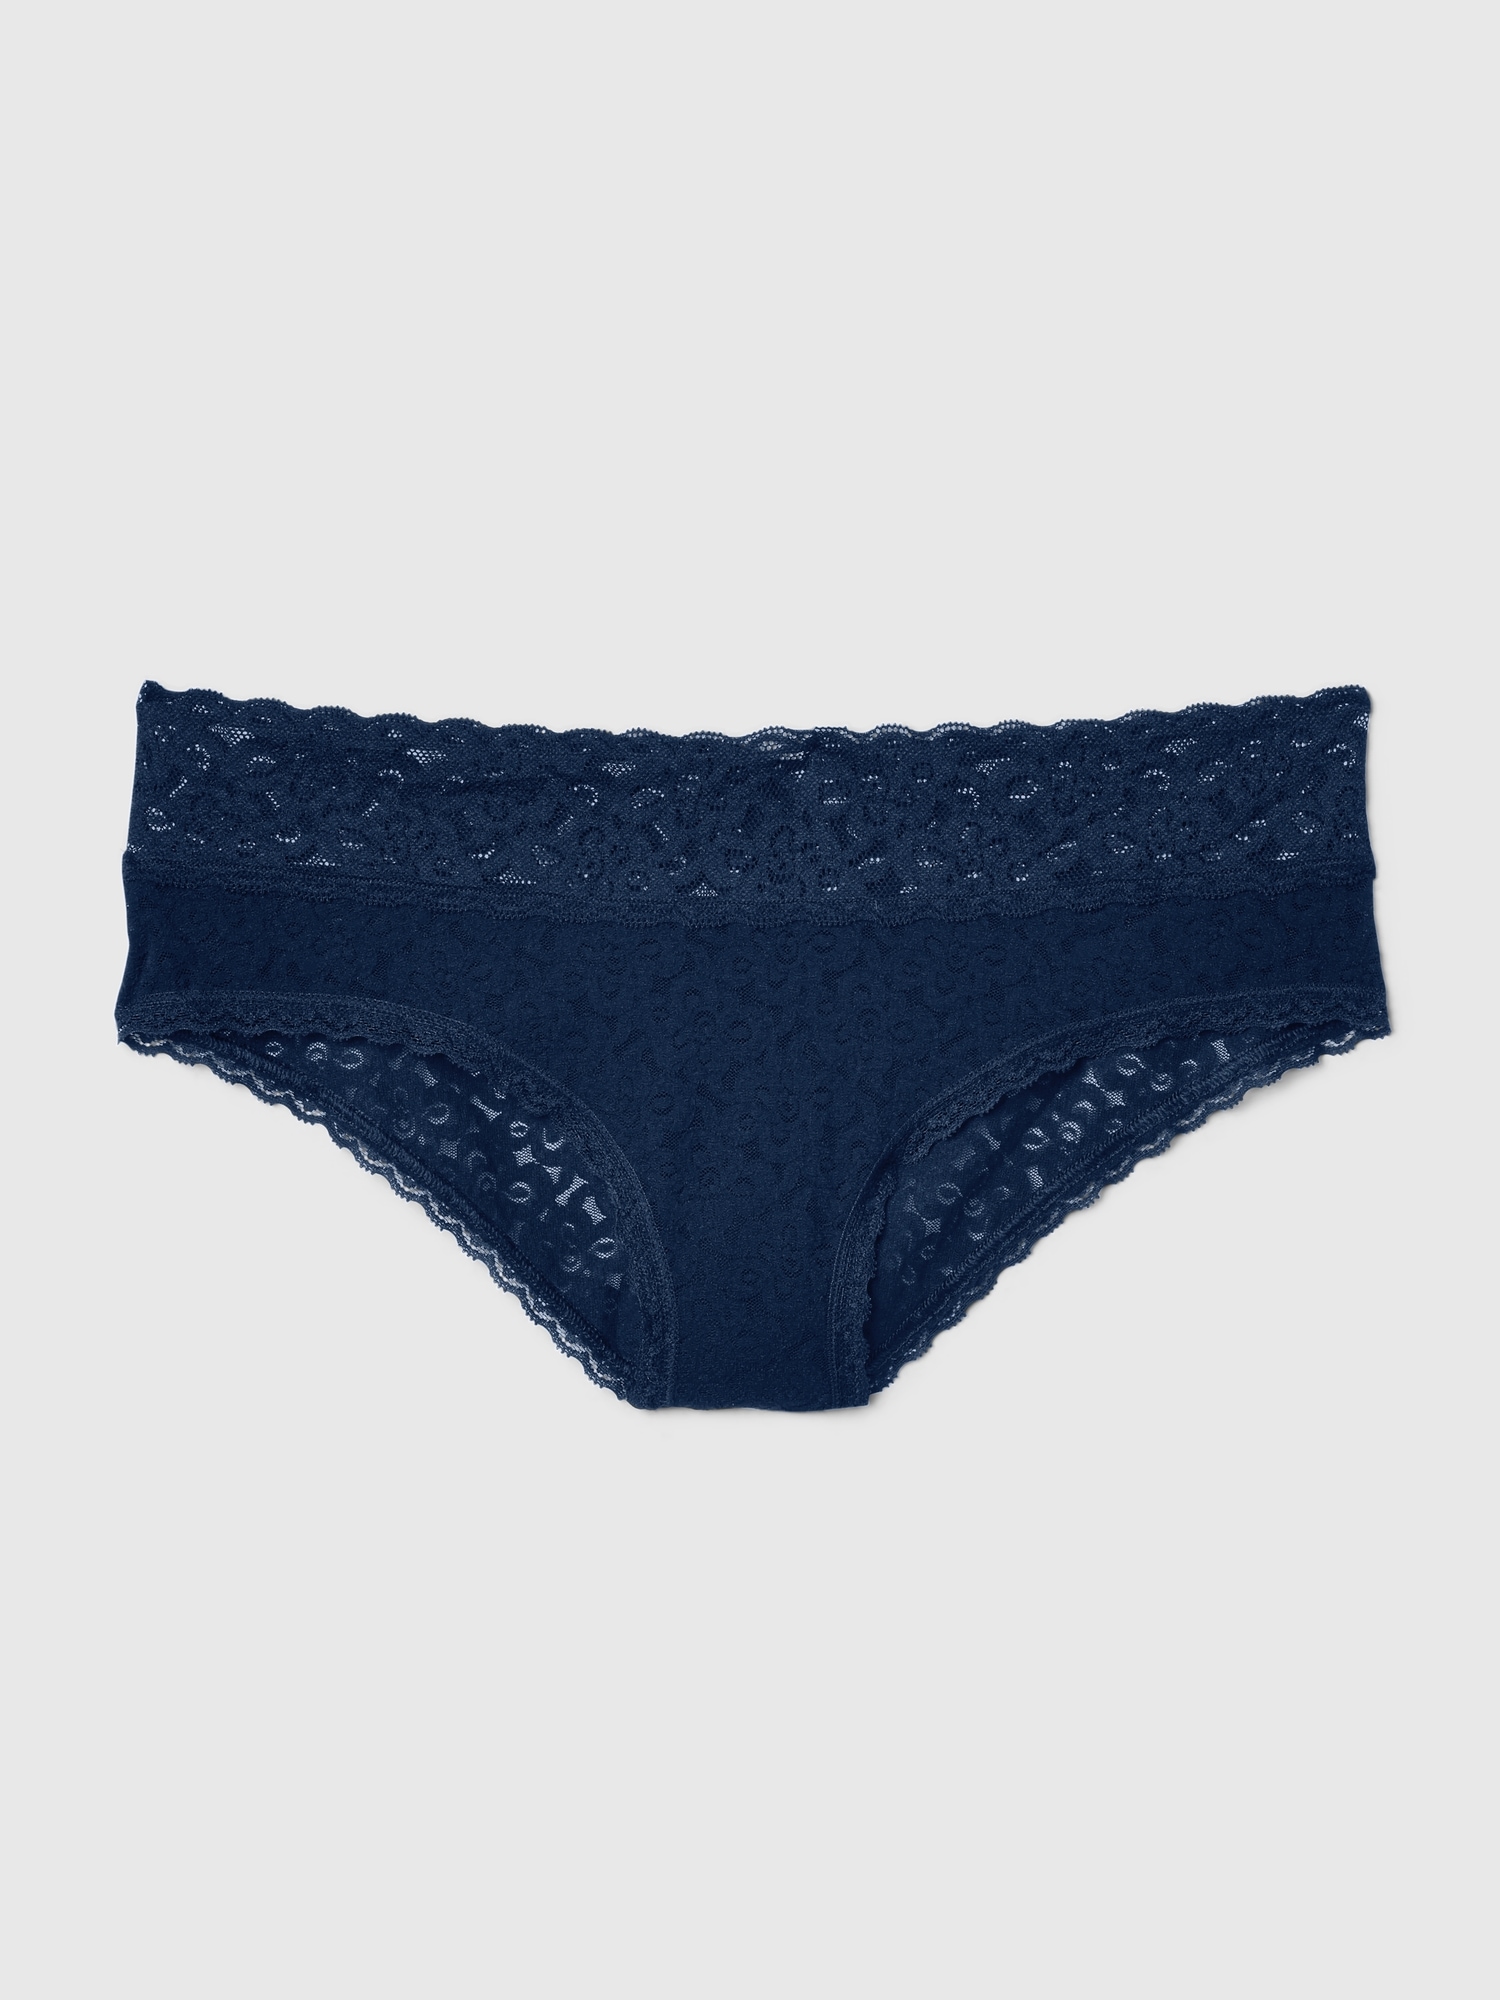 Scalloped Lace Trim Cheeky Hipster Underwear